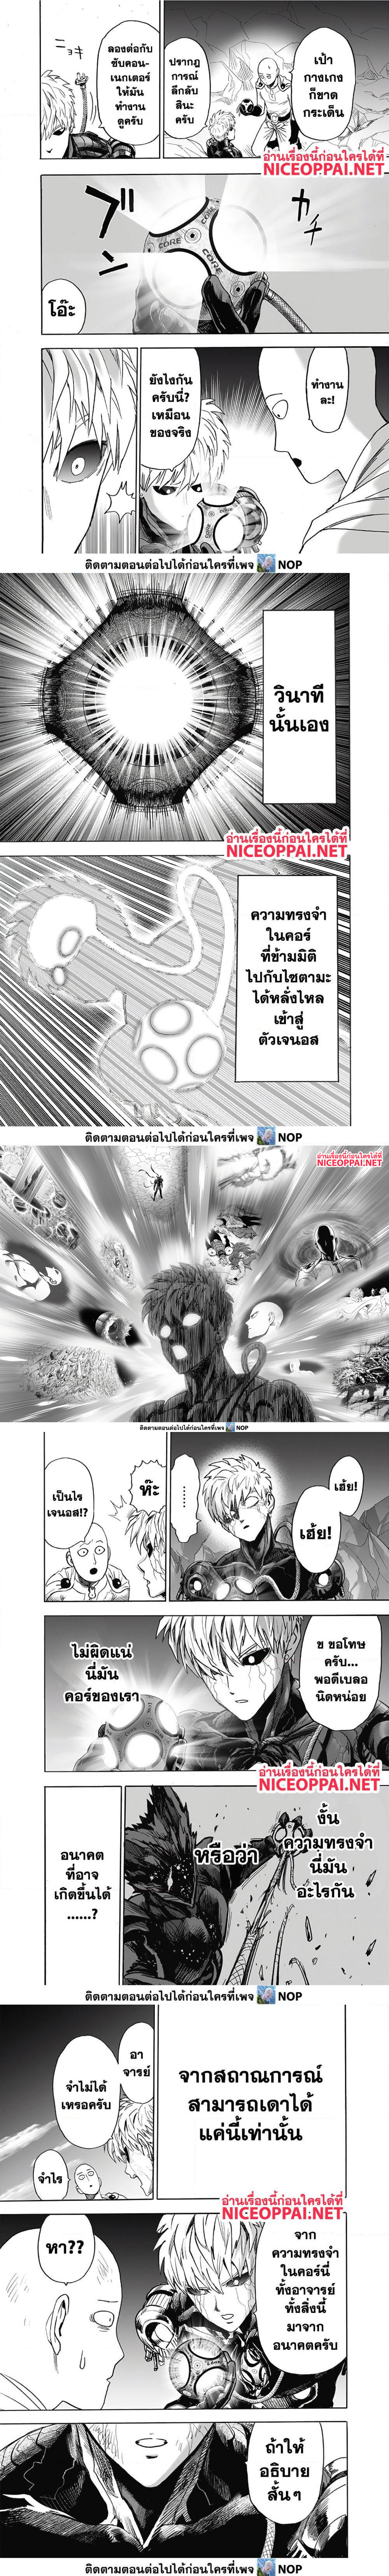 One Punch Man02